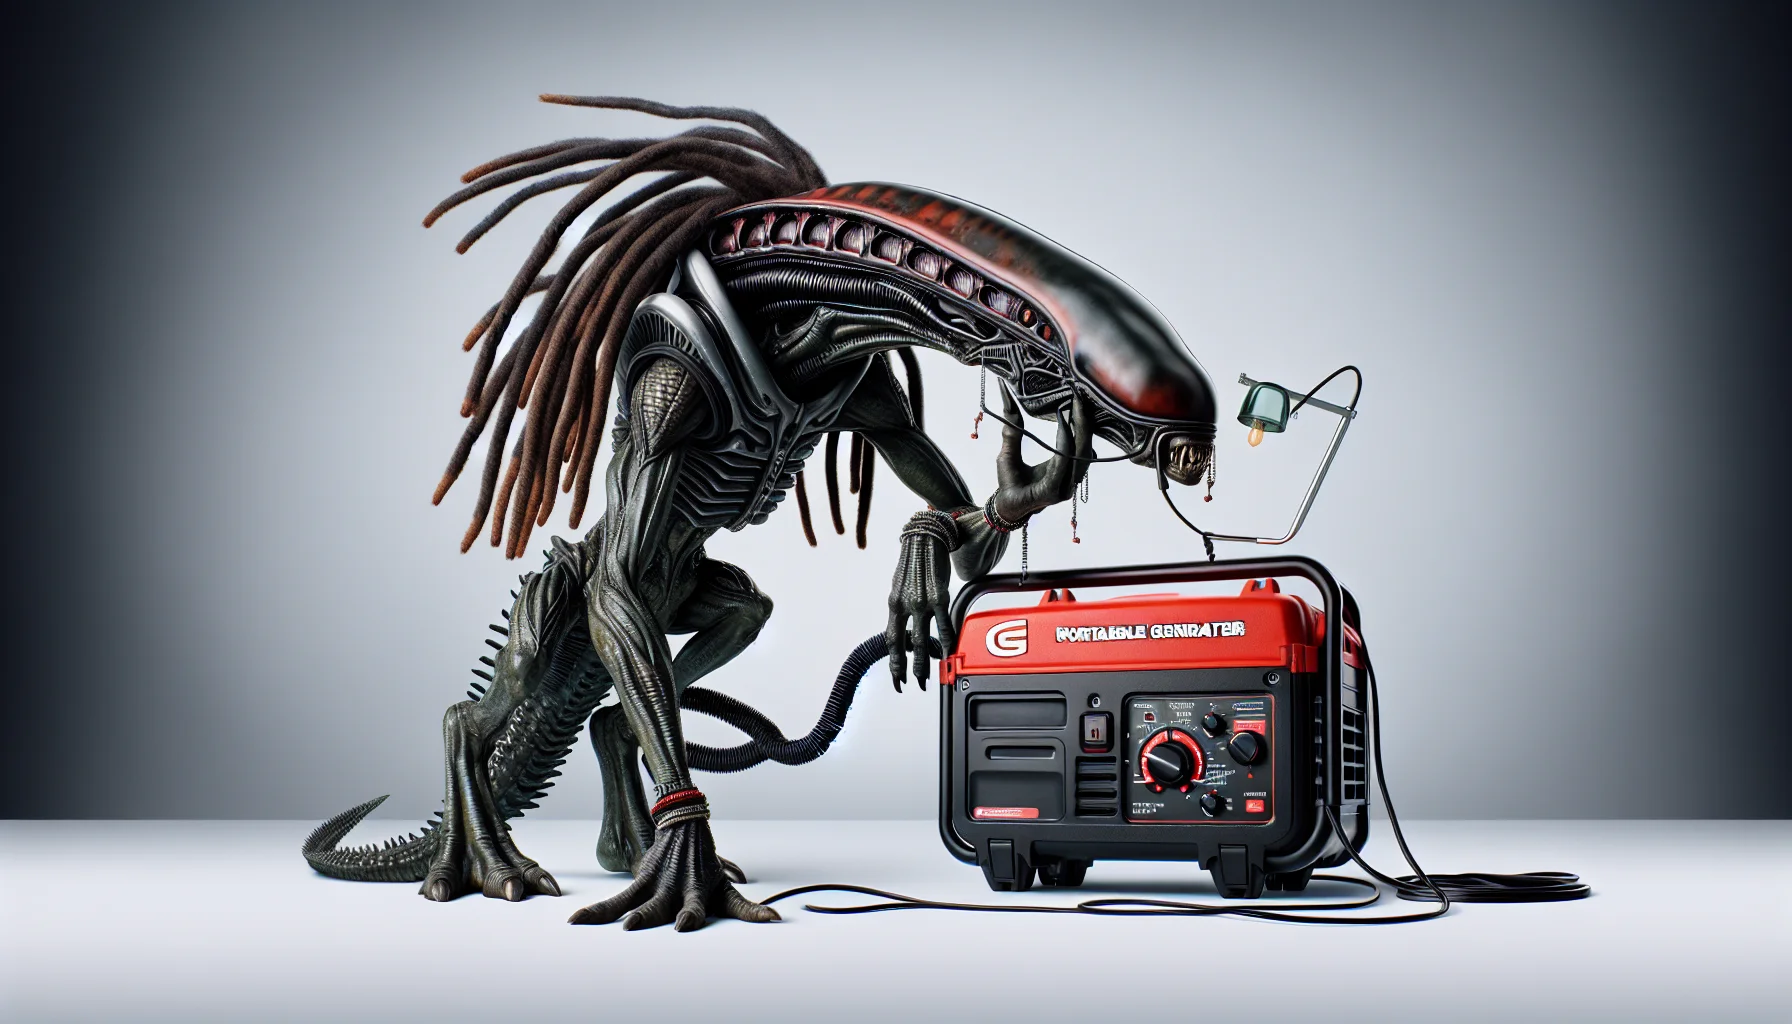 Visualize a humorous scenario where a humanoid alien creature, having distinct features like dreadlock-like hair tendrils, large mandibles and thermal vision, is bemused and perplexed by a nondescript portable generator. The creature, often known for its hunting prowess in popular culture, now seems baffled by the simple task of generating electricity. The portable generator carrying the insignia of a red capital 'H', serves as a stark contrast to the creature's high-tech arsenal. Let it be an interesting juxtaposition of old and new, simple and complex, enticing human viewers to think about electricity generation.